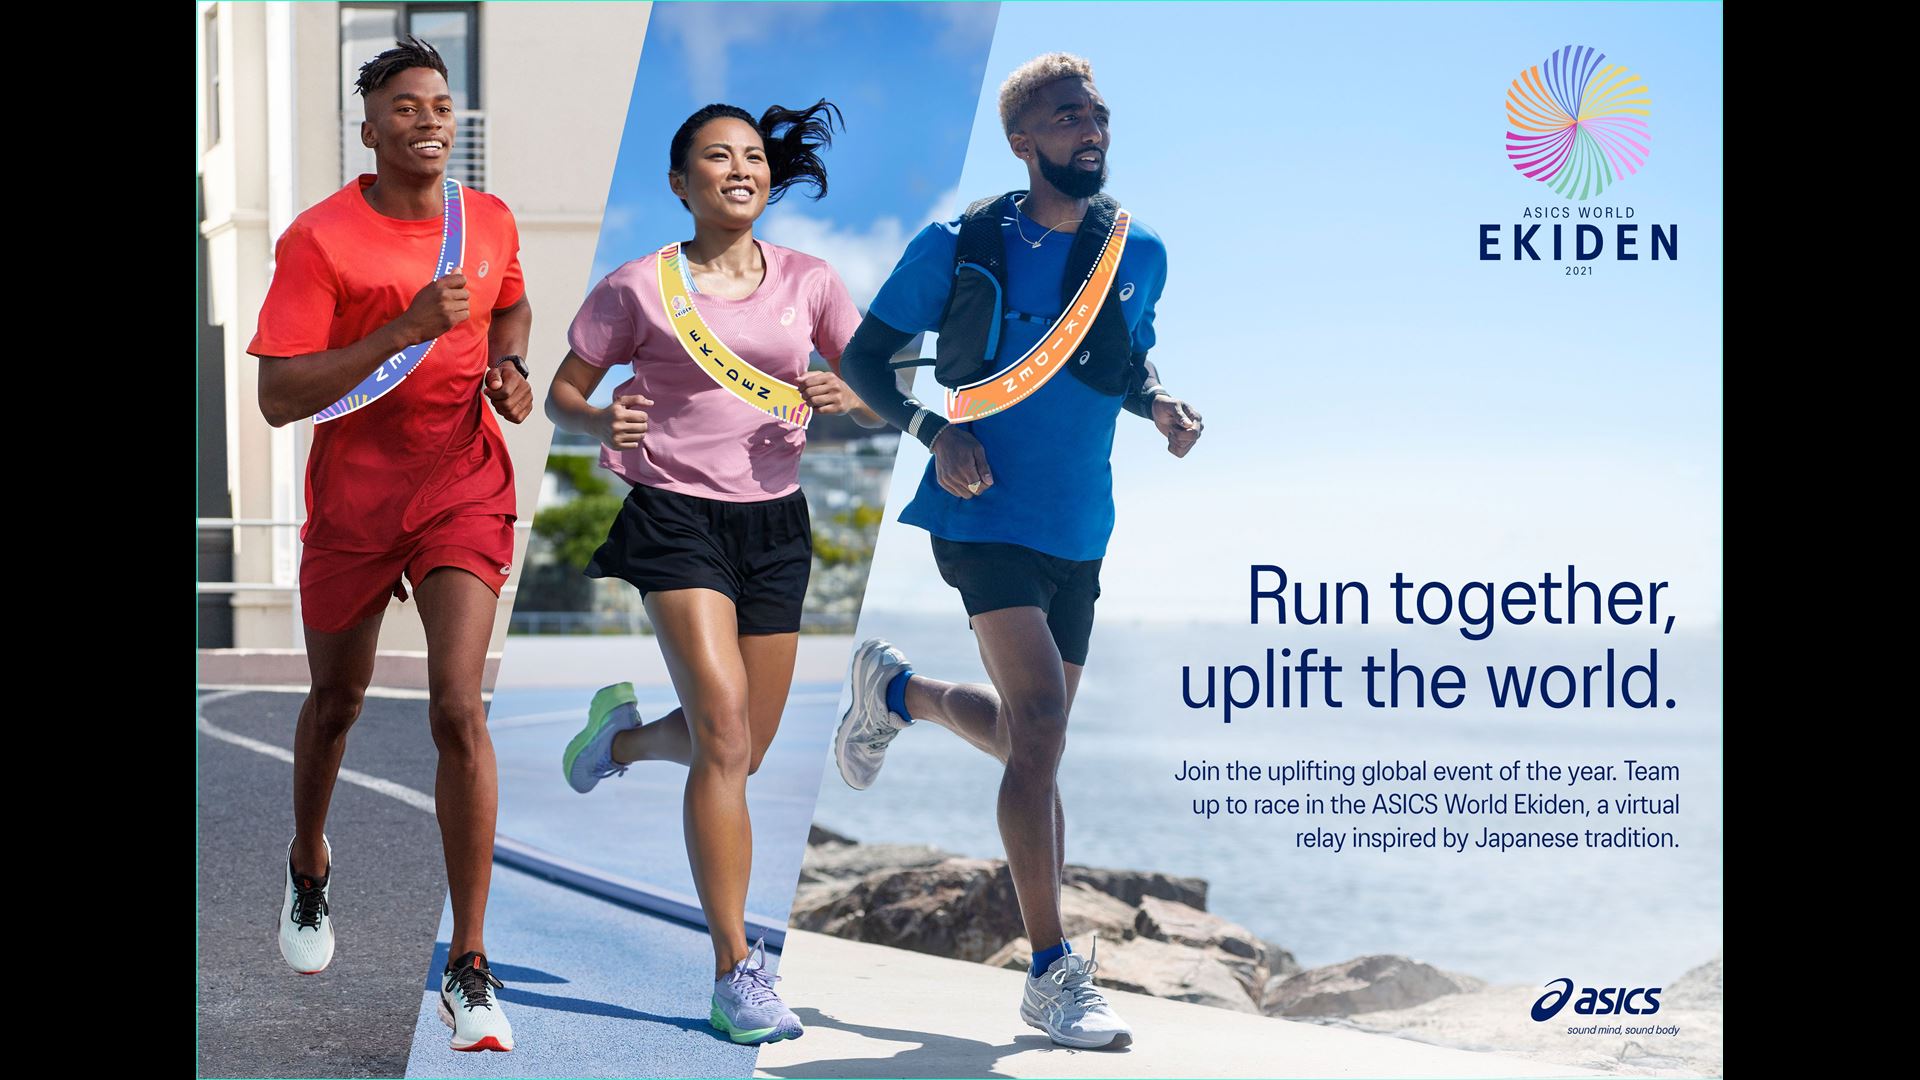 ASICS invites runners to run together to uplift the world in the ASICS World Ekiden 2021